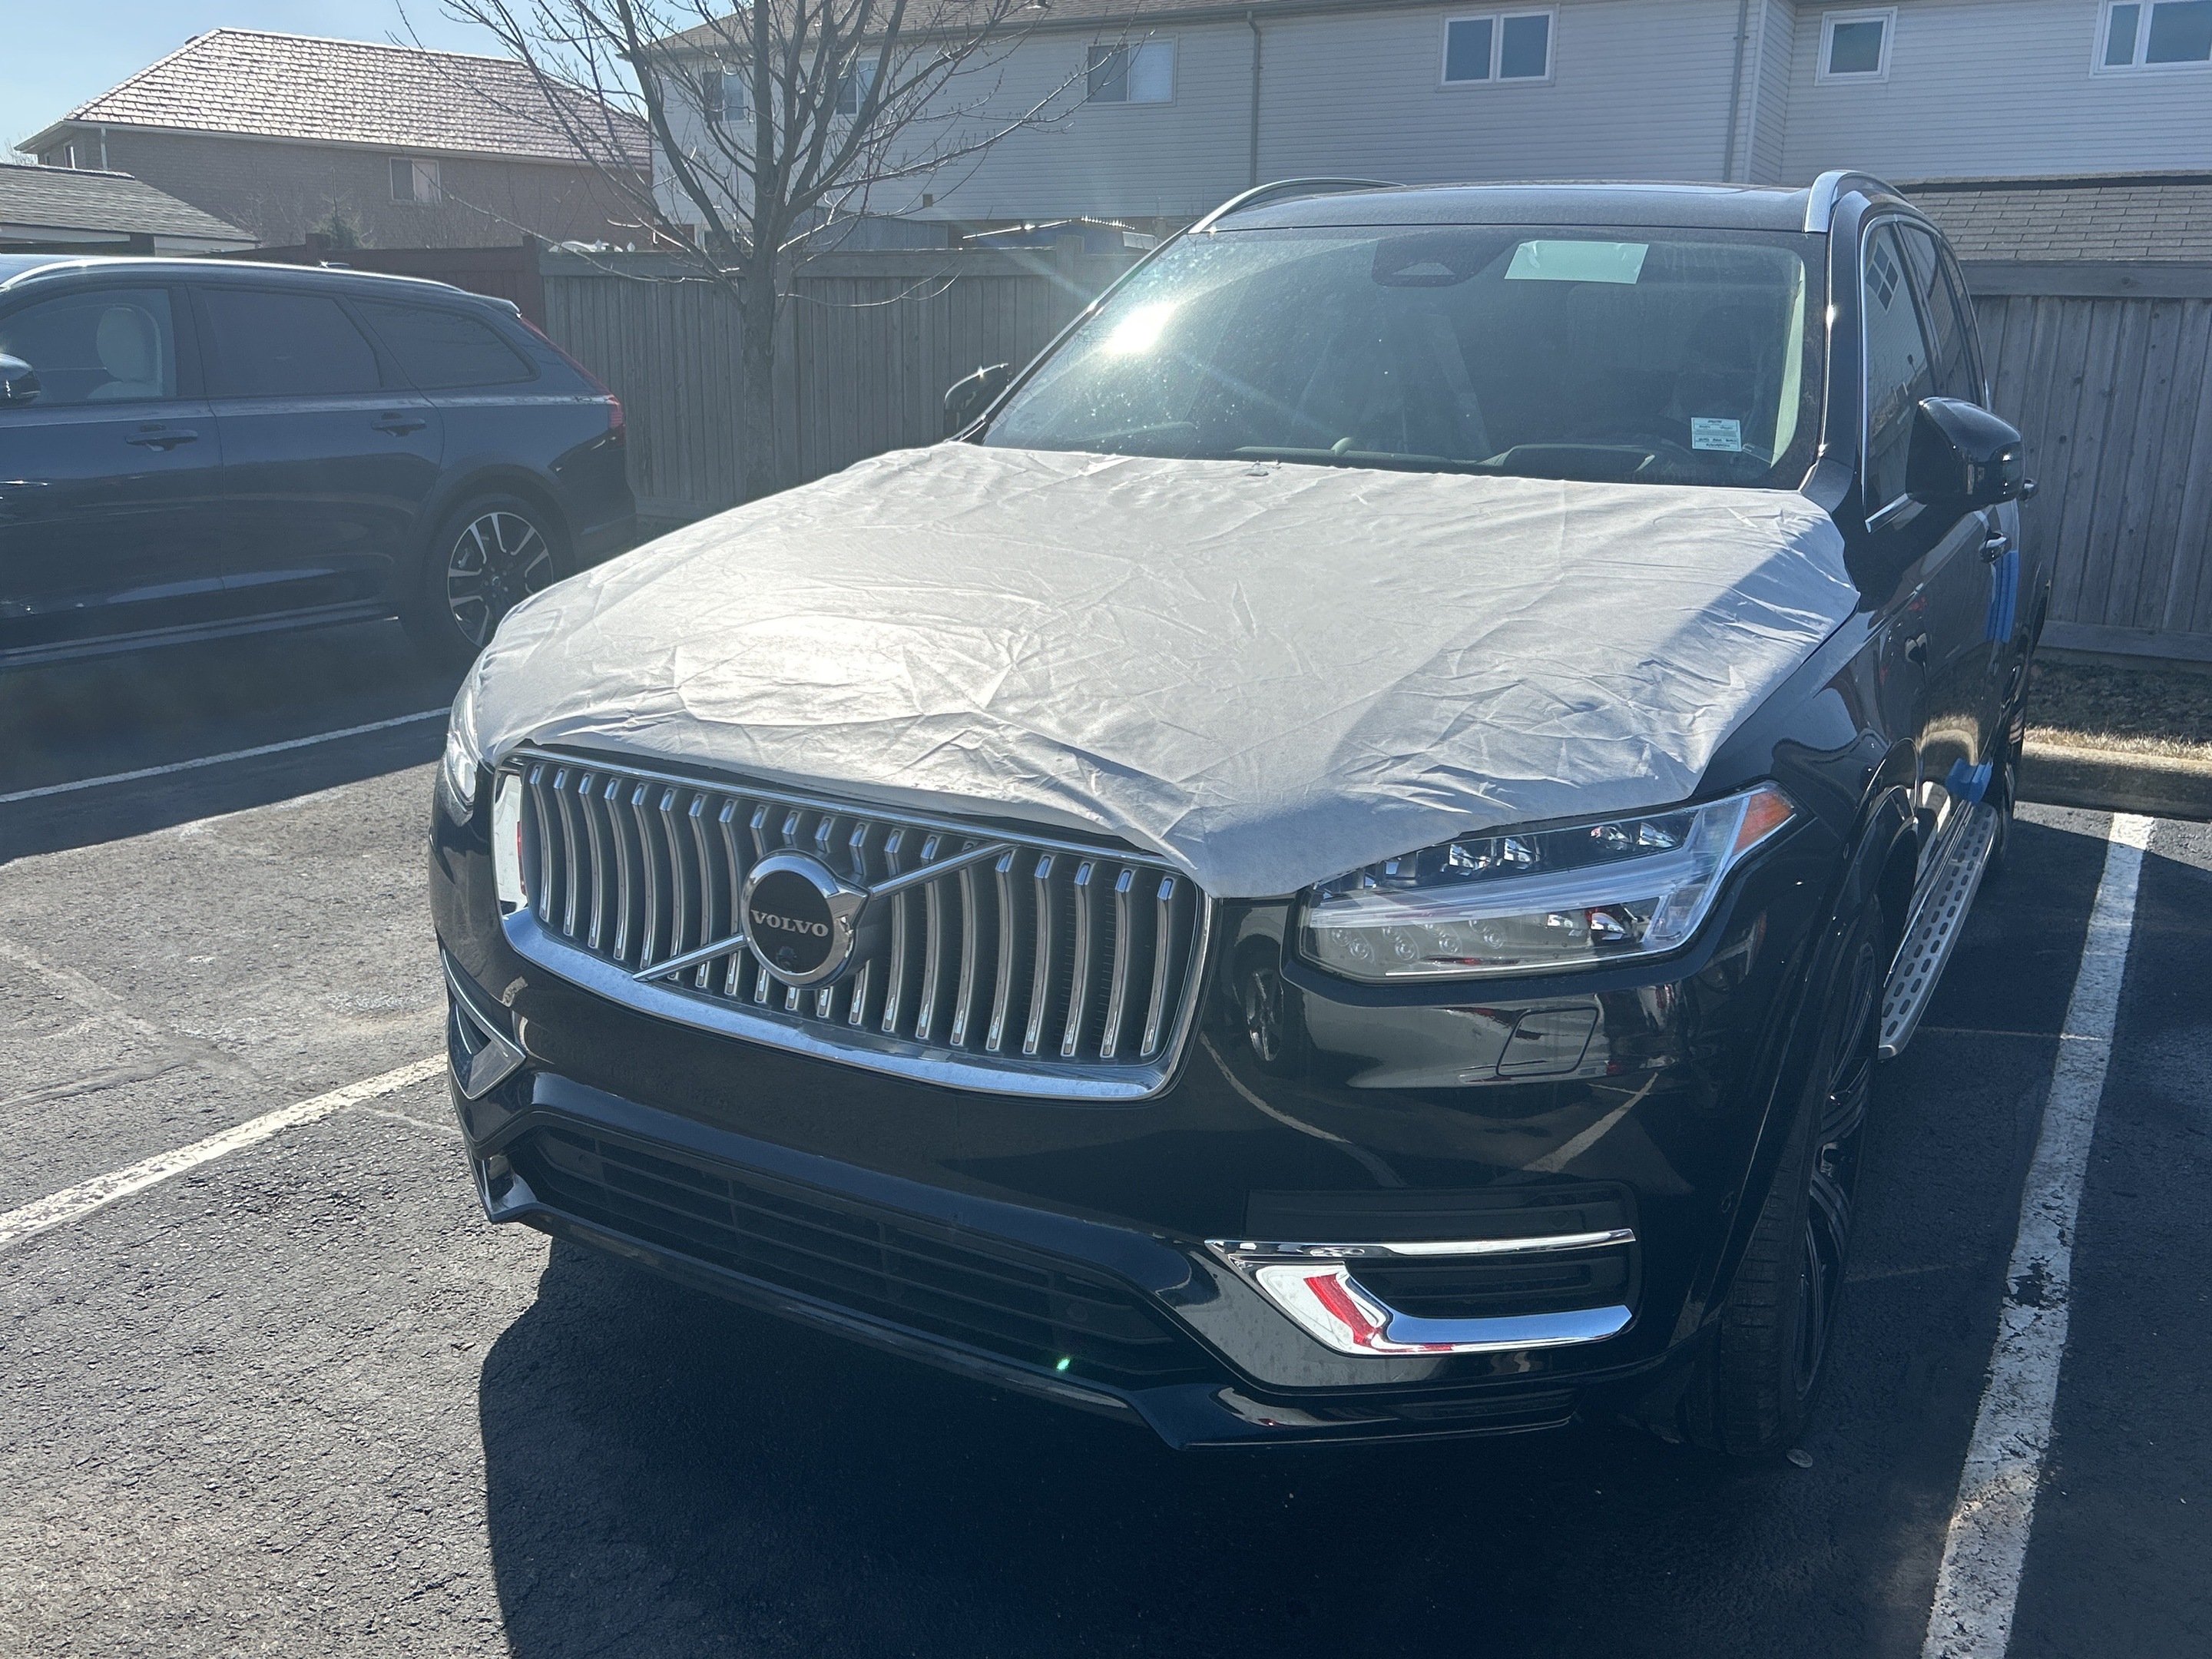 2024 Volvo XC90 Recharge T8 eAWD PHEV Ultimate Bright Theme 7-Seater